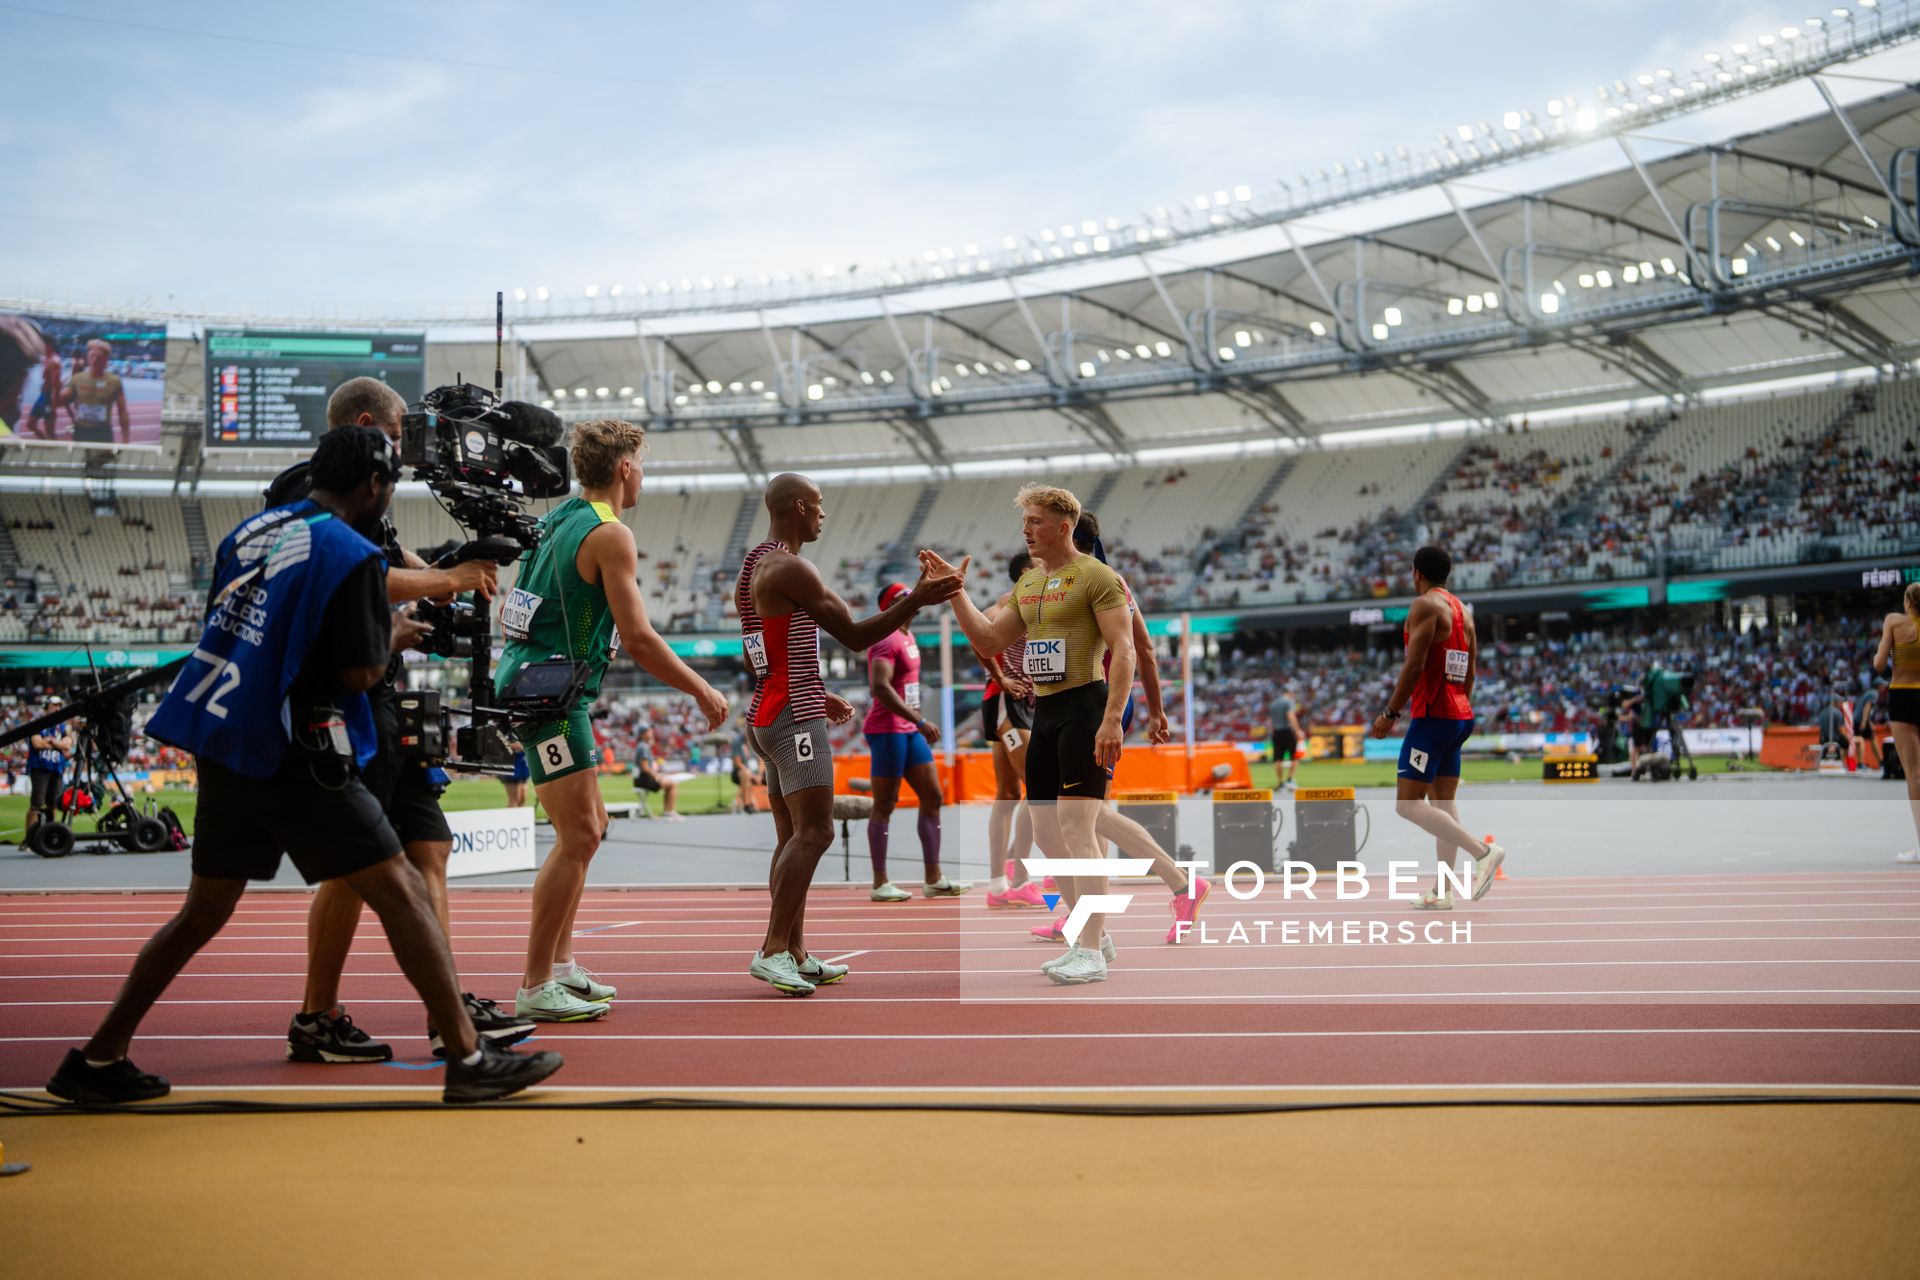 Manuel Eitel (GER/Germany) on Day 6 of the World Athletics Championships Budapest 23 at the National Athletics Centre in Budapest, Hungary on August 24, 2023.